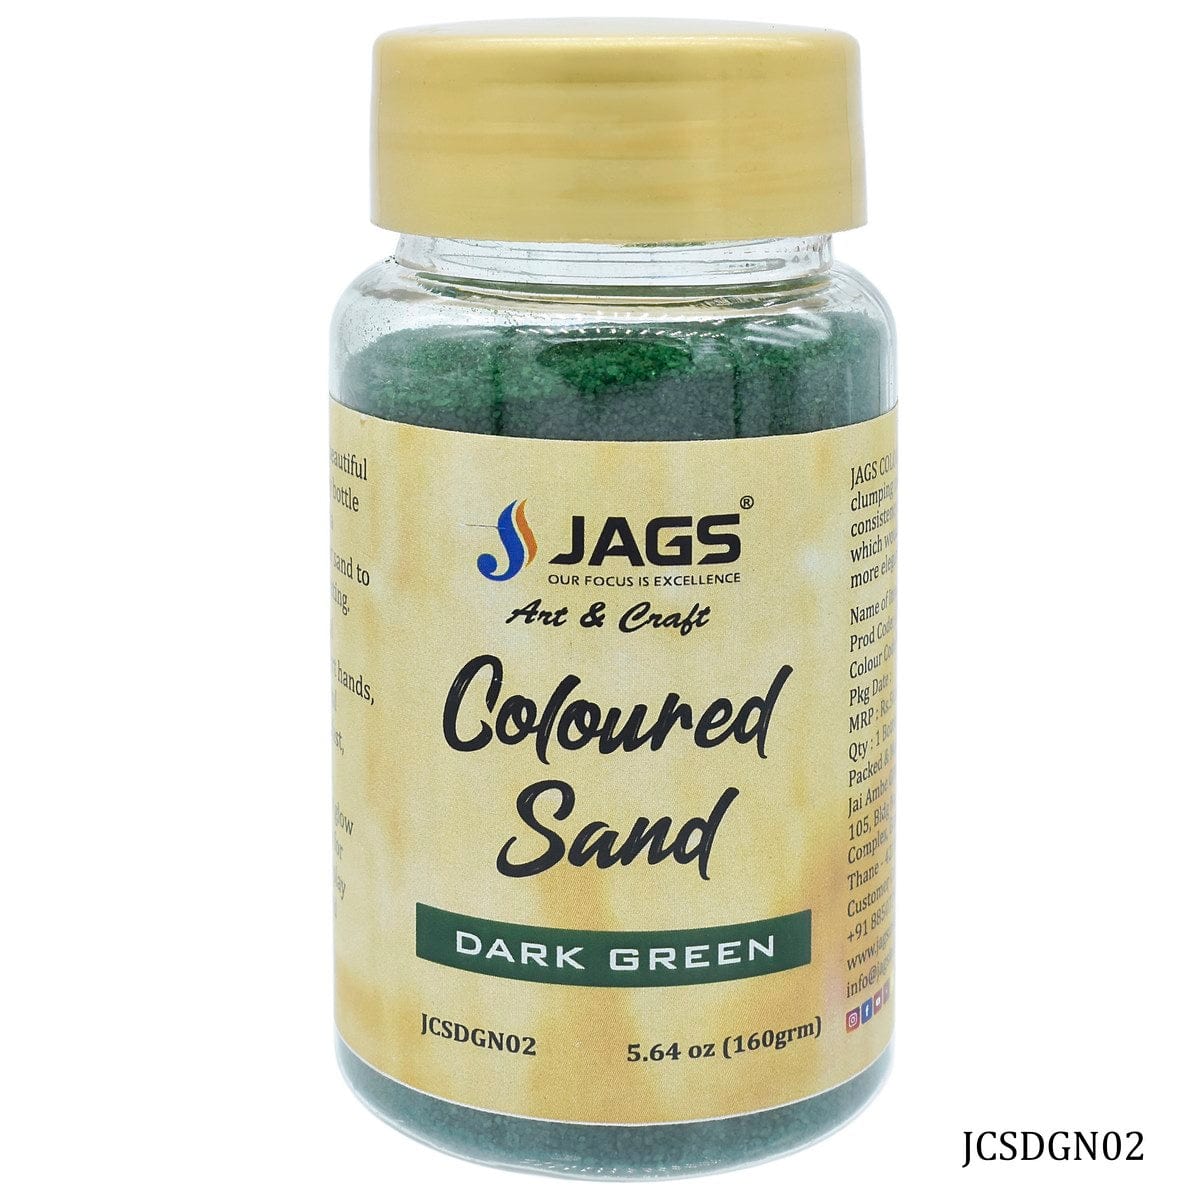 jags-mumbai Sand Jags Coloured Sand 160Gms Dark Green No. 2 - Vibrant and Versatile Sand for Crafts and Decor